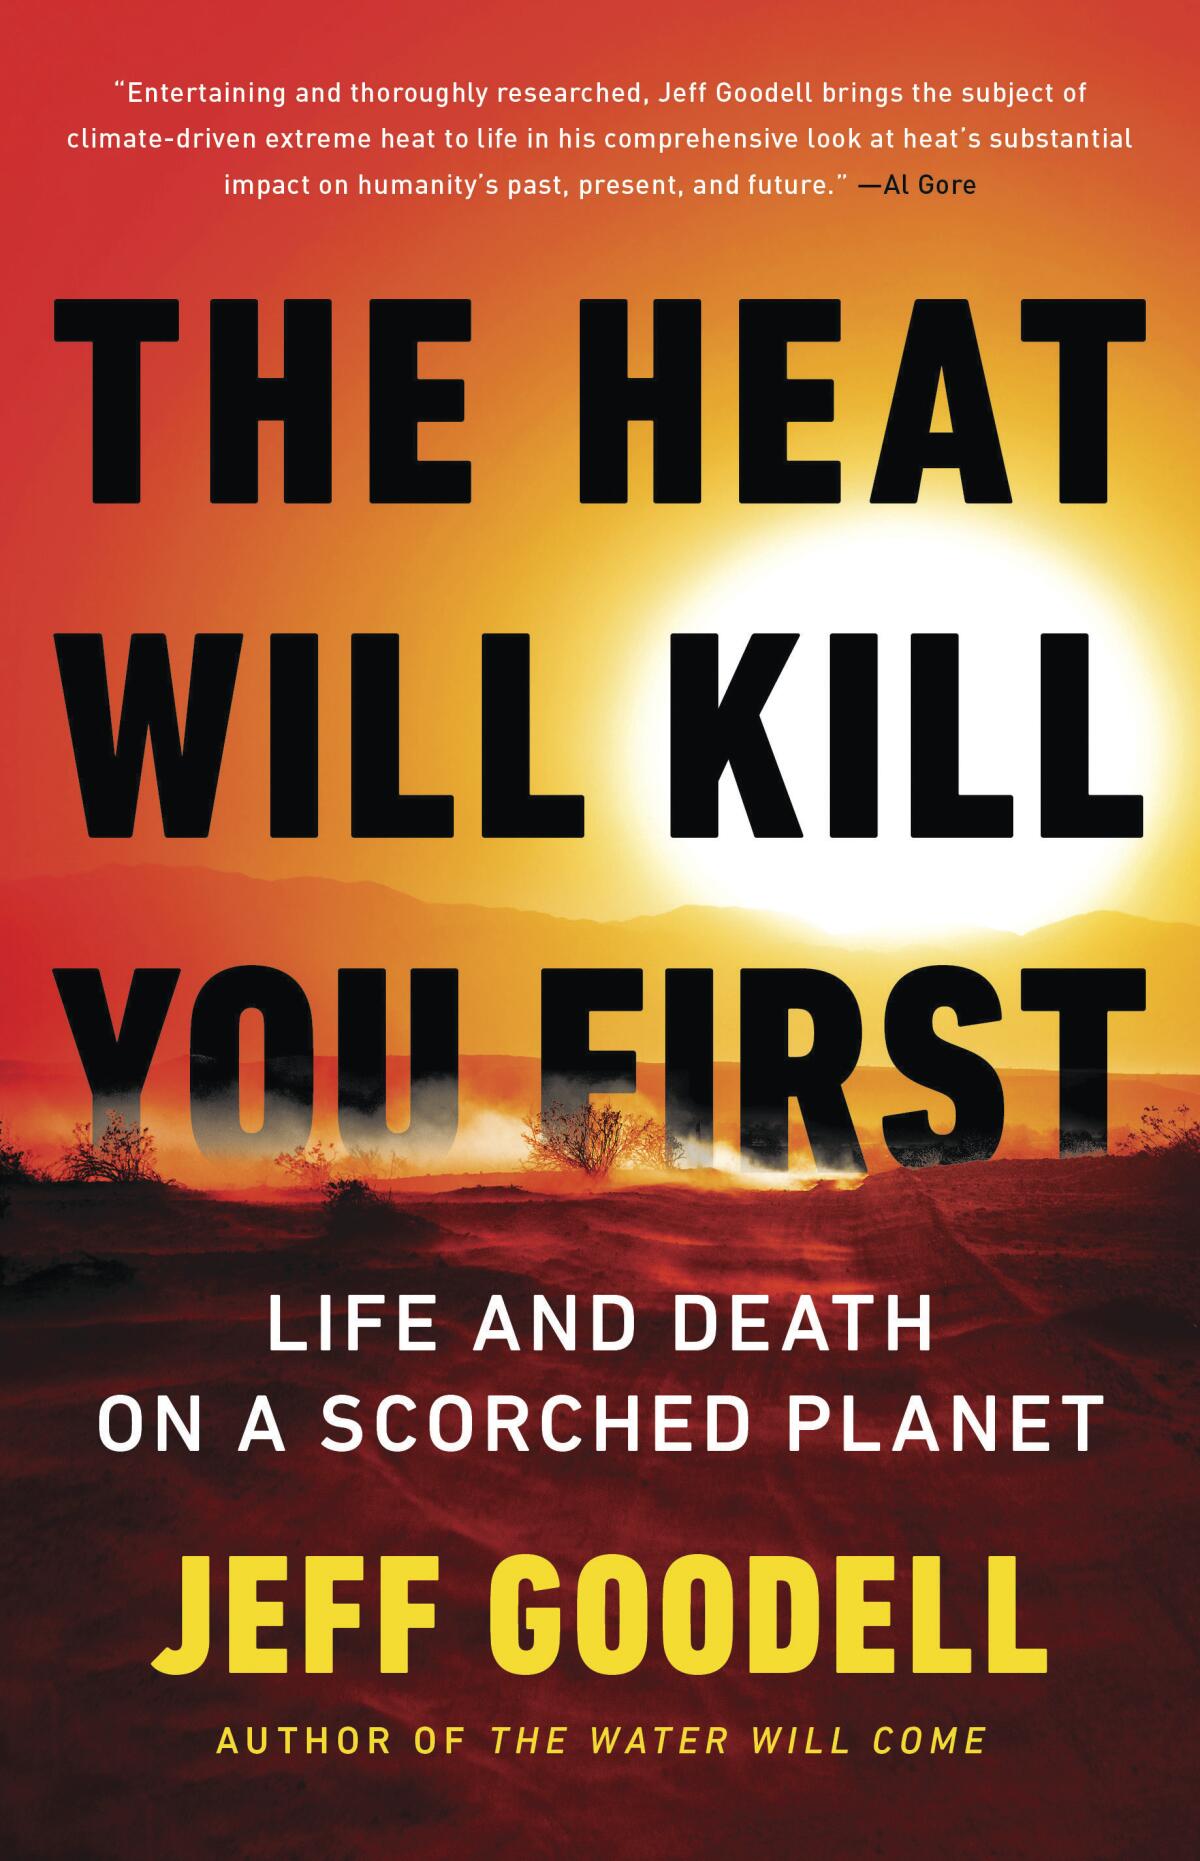 book cover for 'The Heat Will Kill You First' by Jeff Goodell features a sunset.